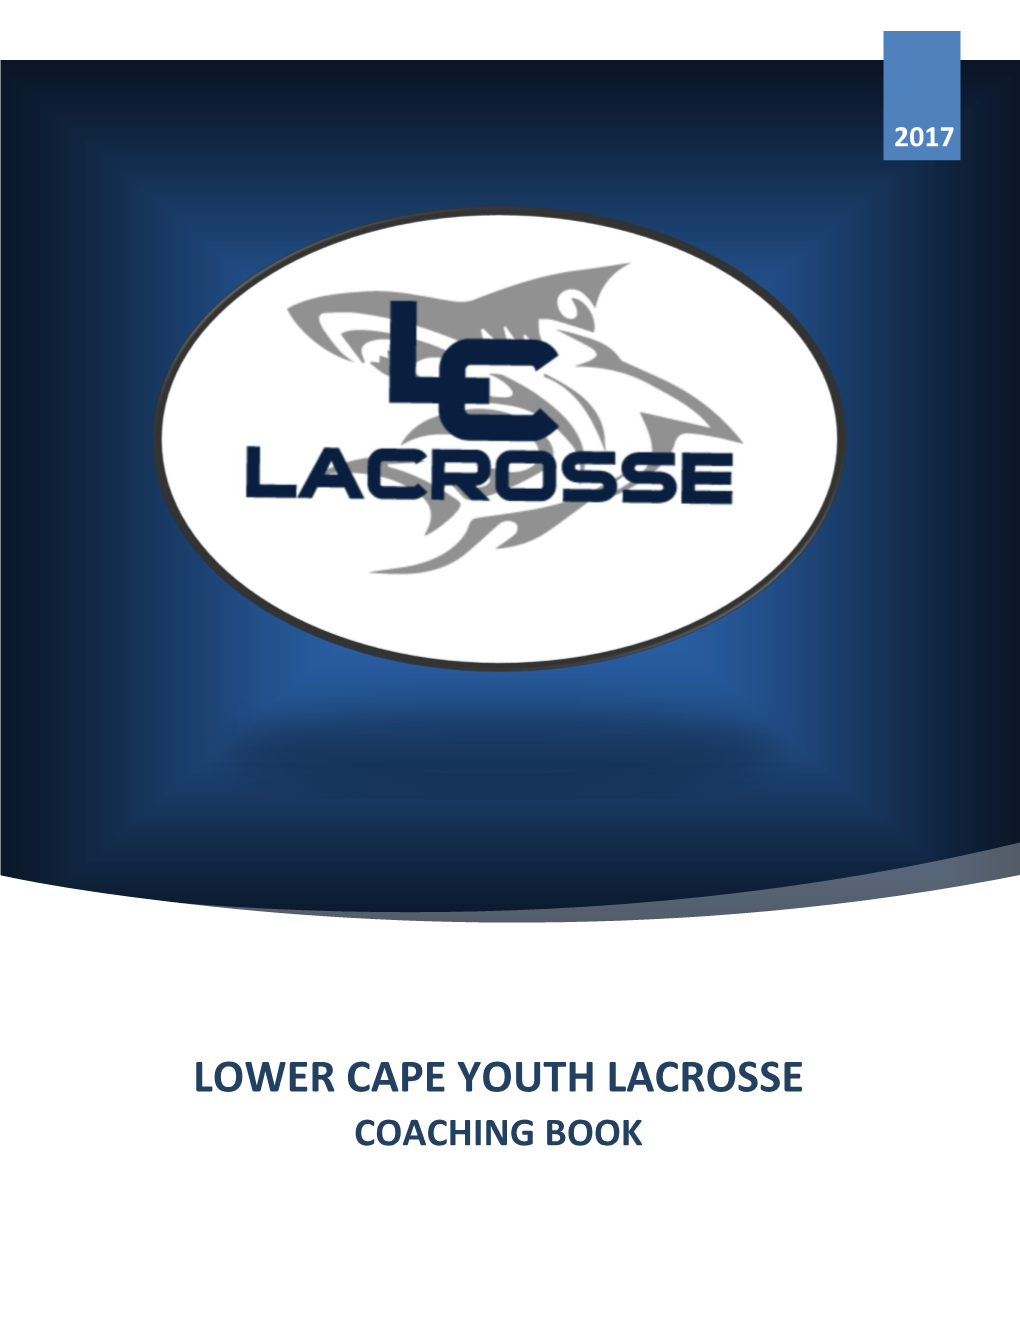 Lower Cape Youth Lacrosse Coaching Book